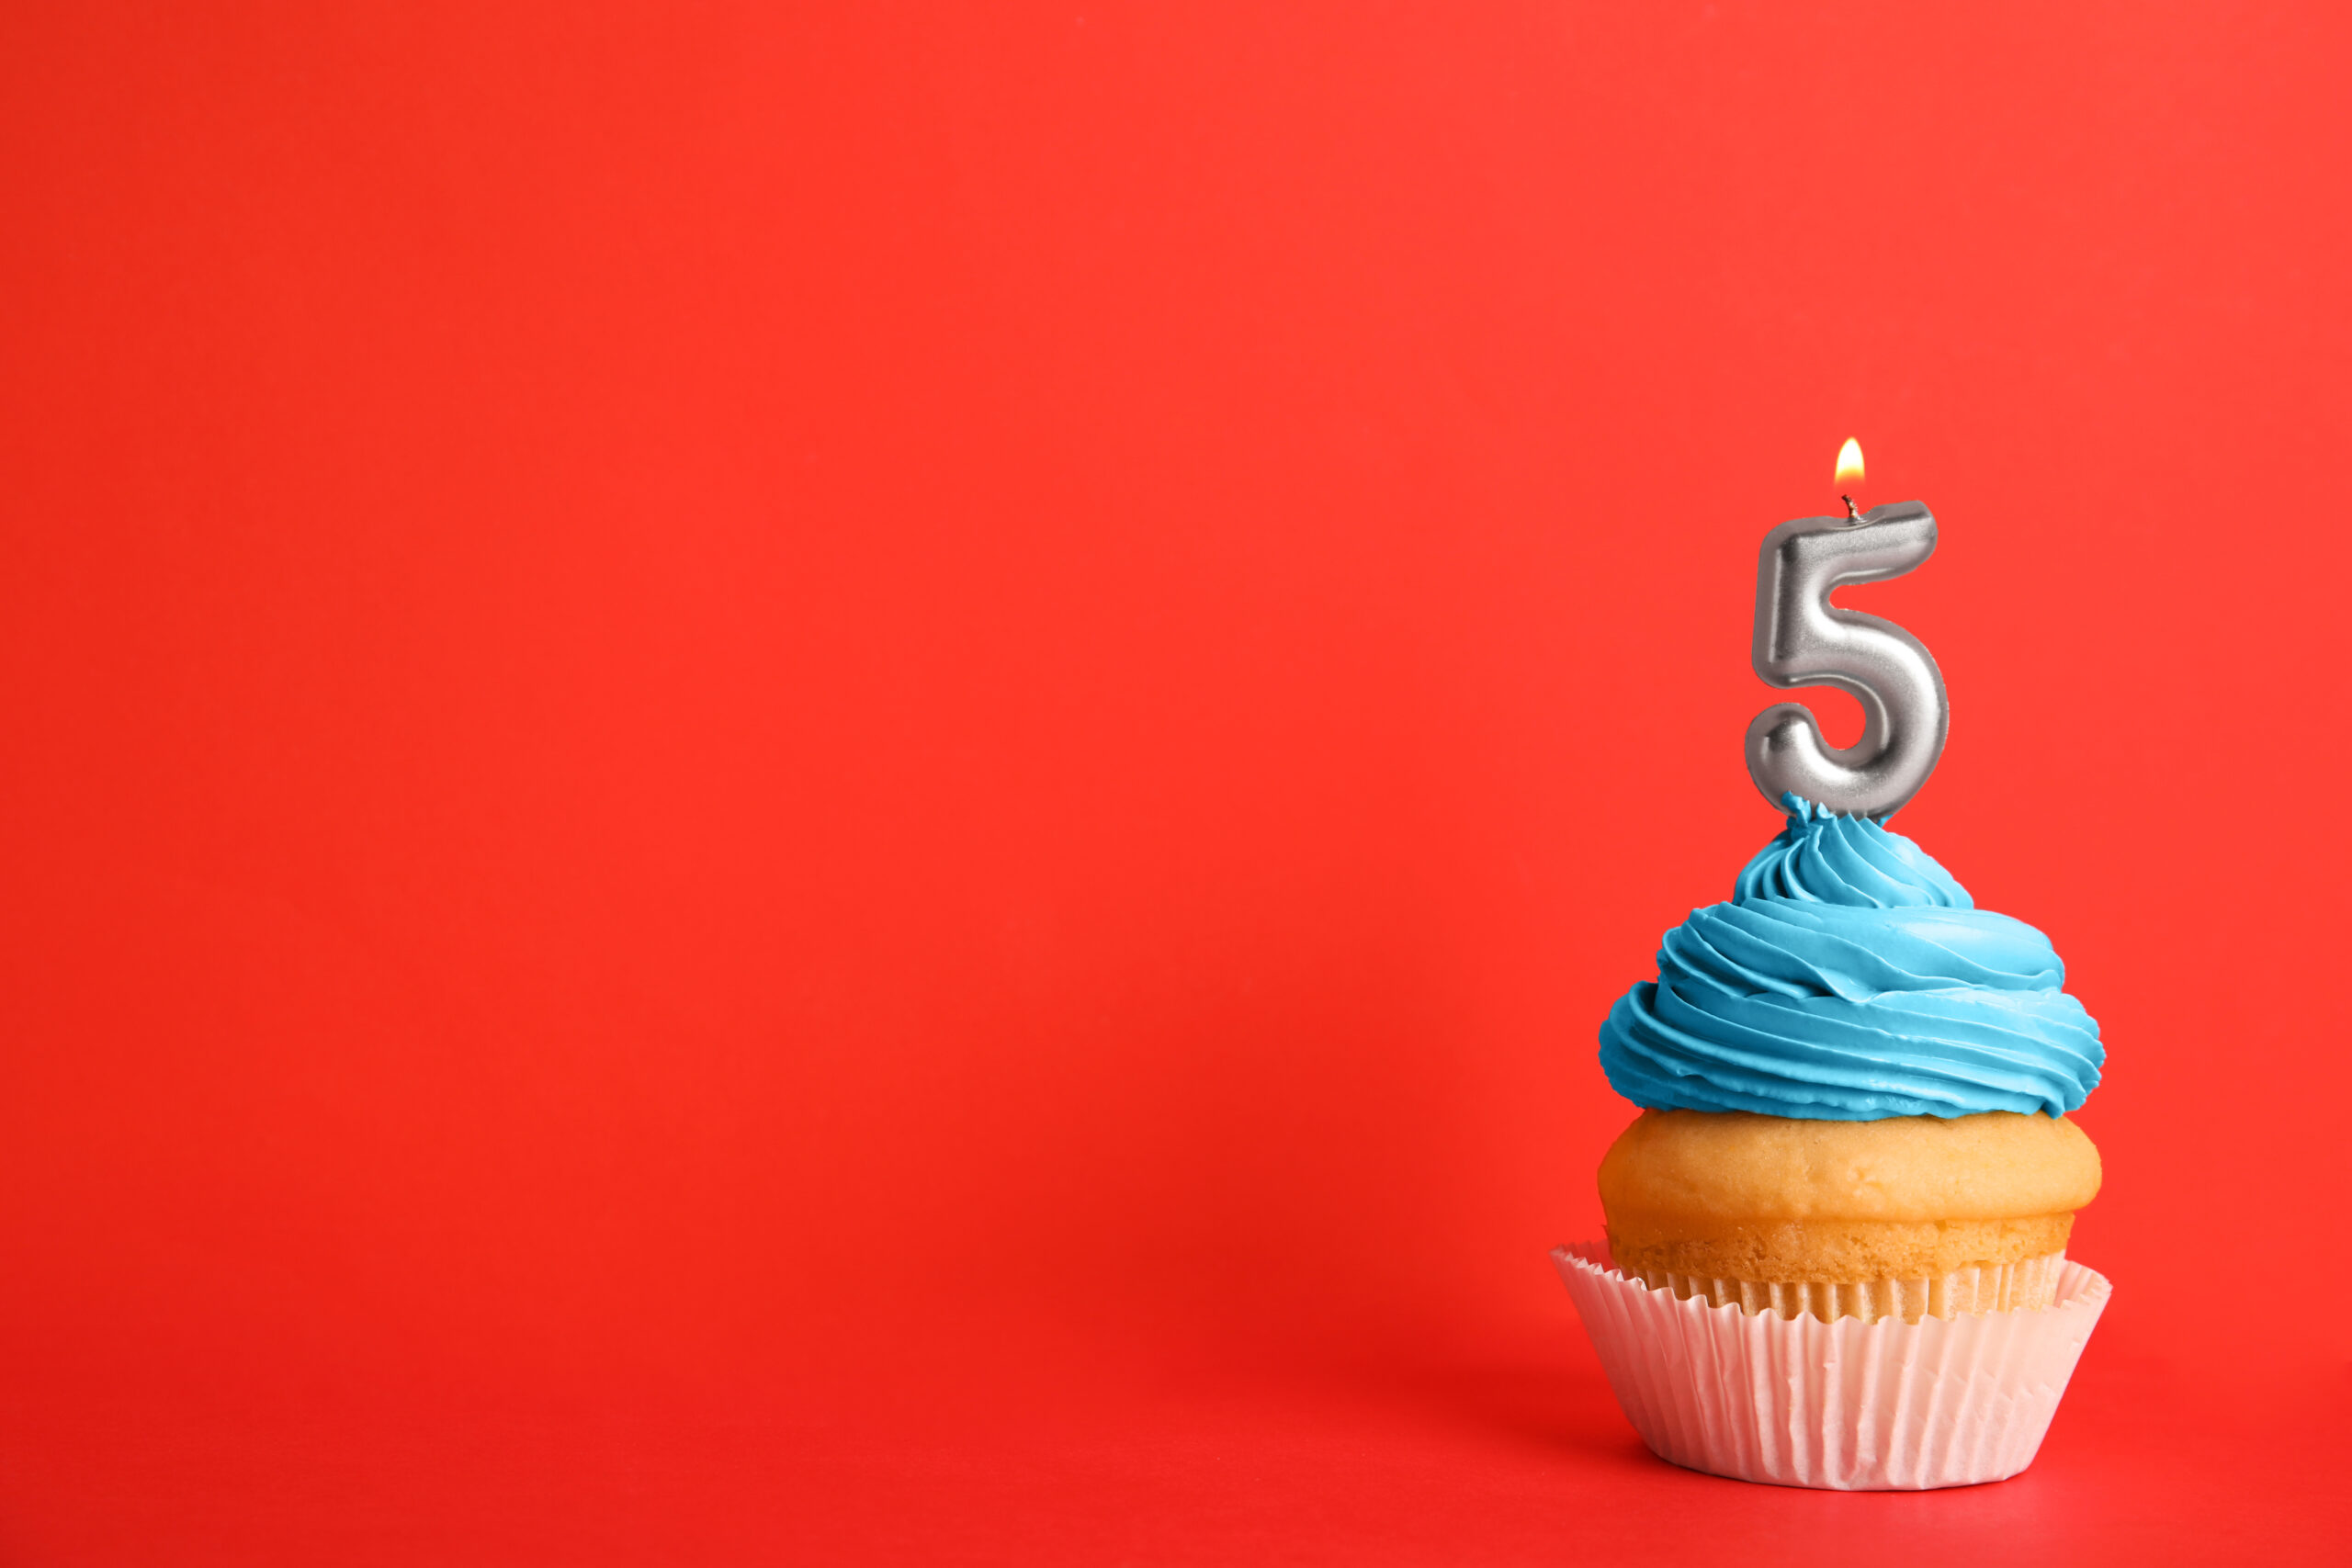 Birthday cupcake with number five candle on red background, space for text